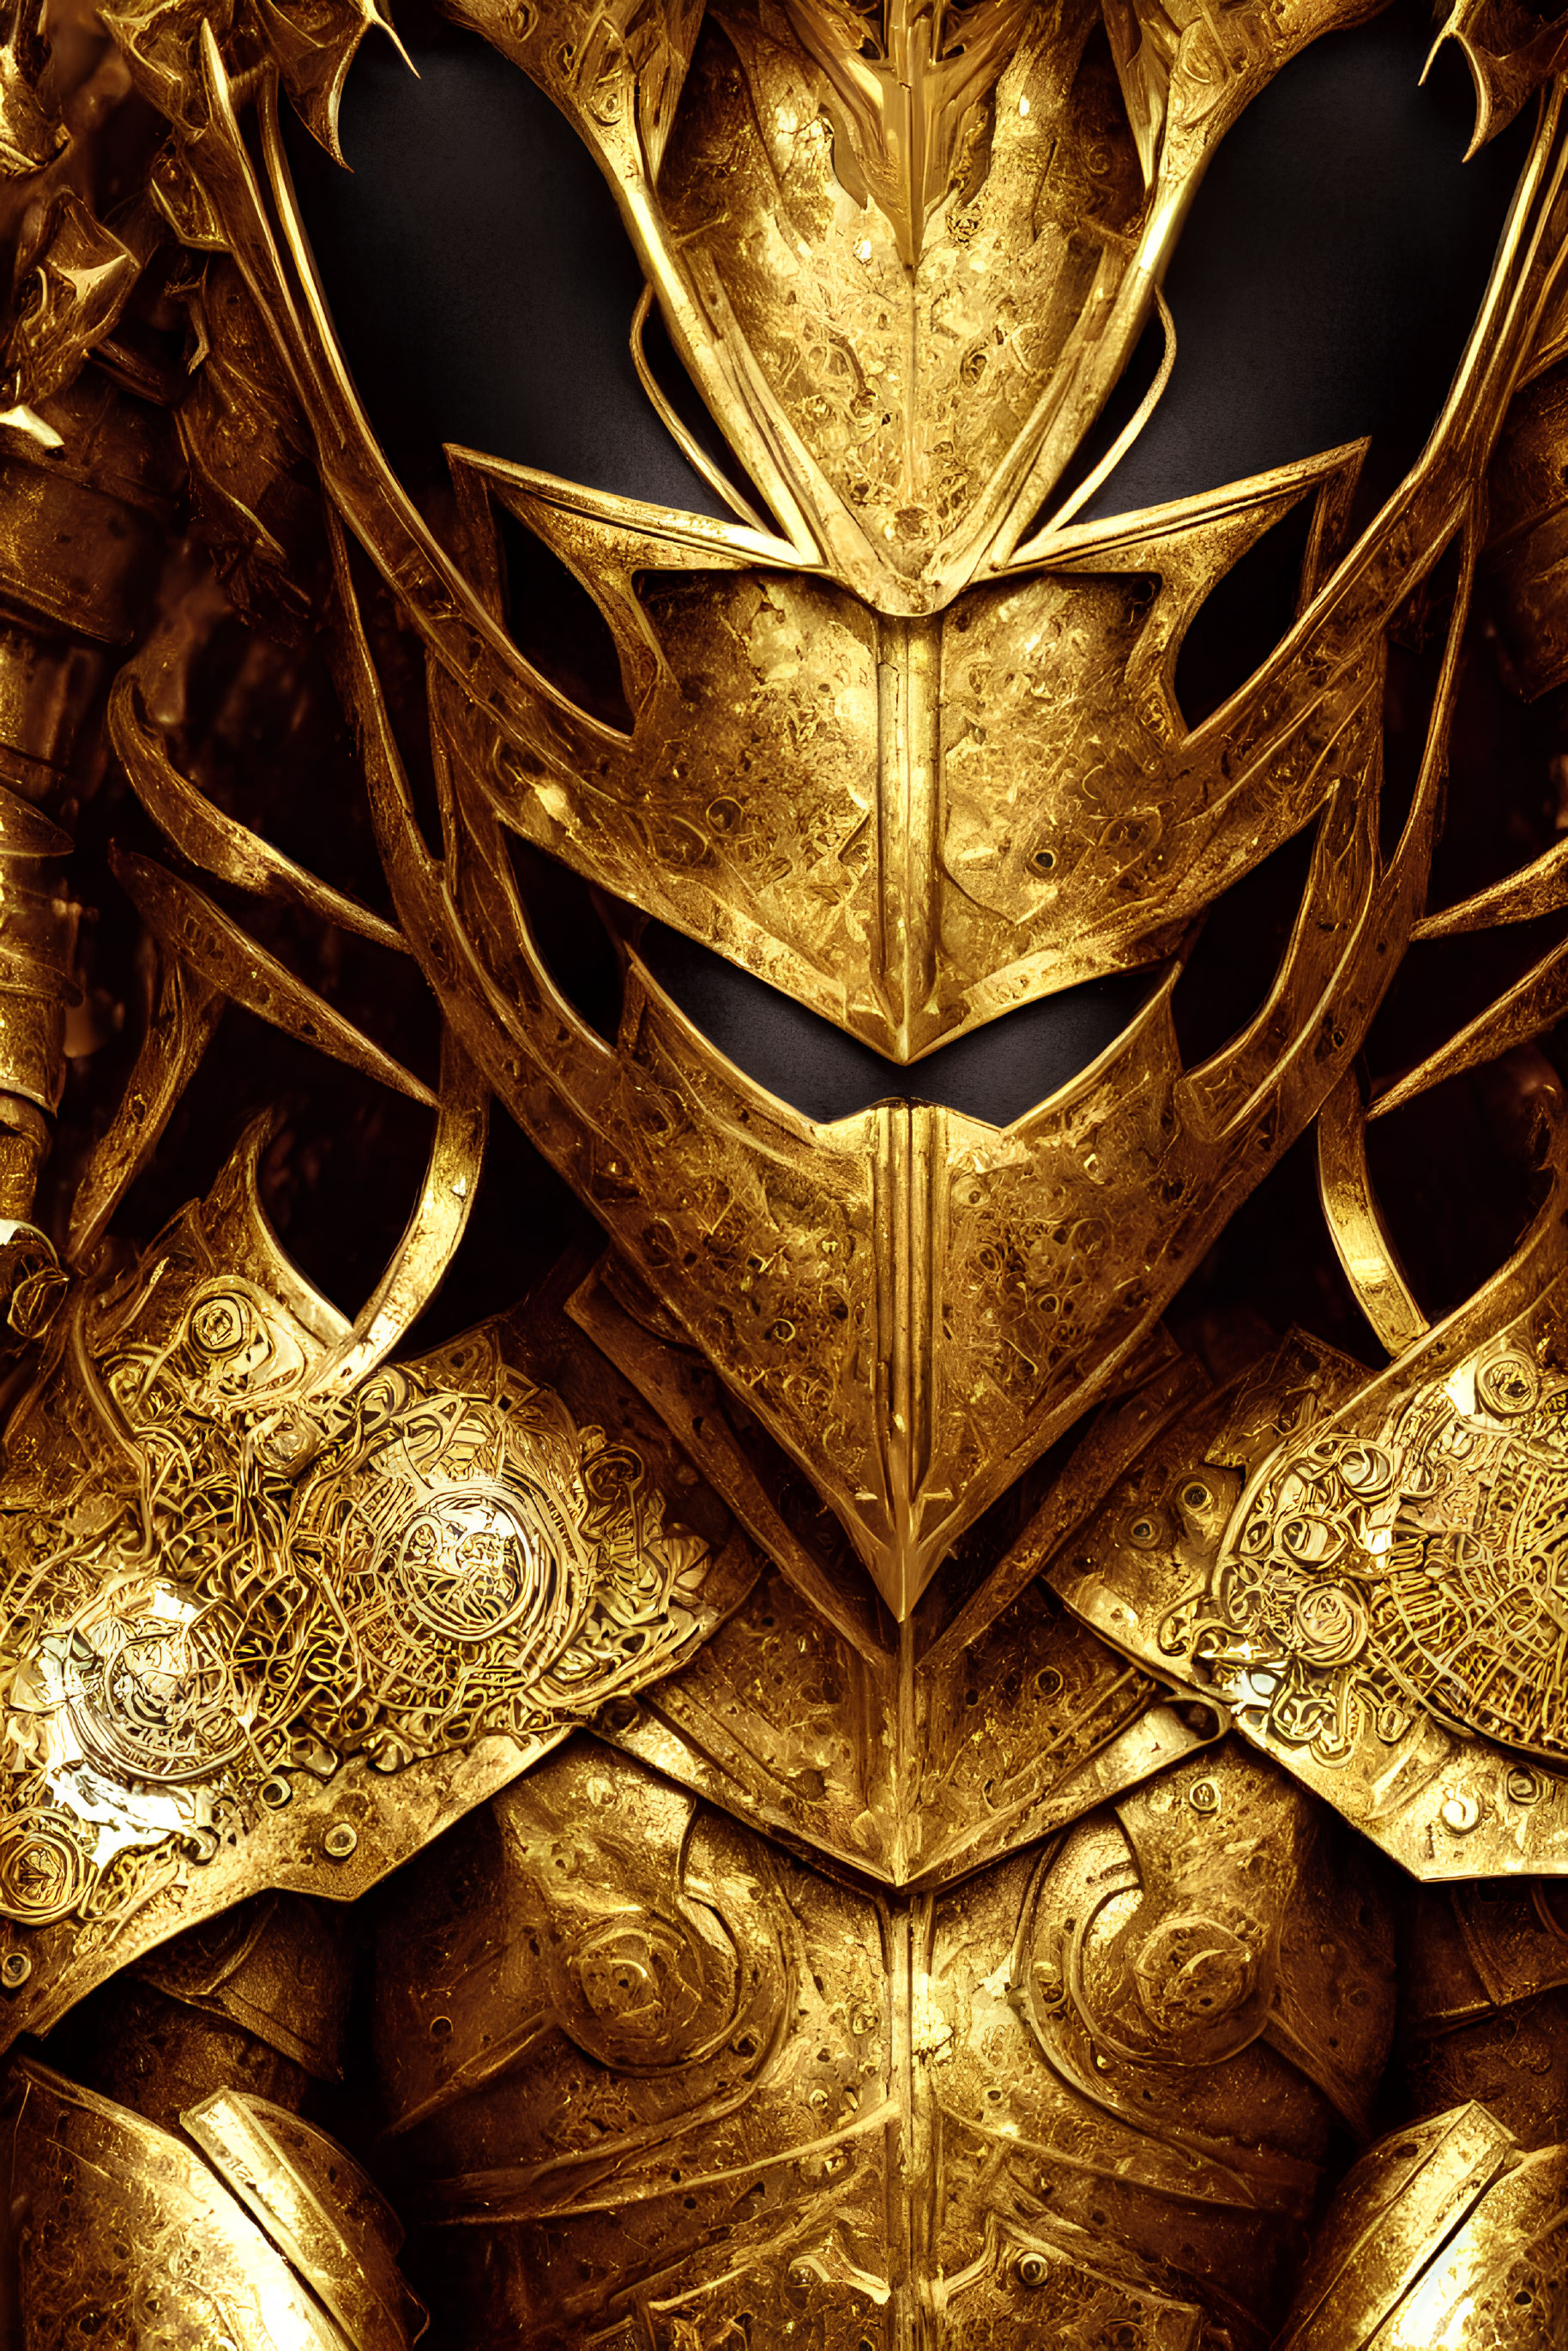 Detailed Golden Armor with Intricate Designs and Menacing Helmet